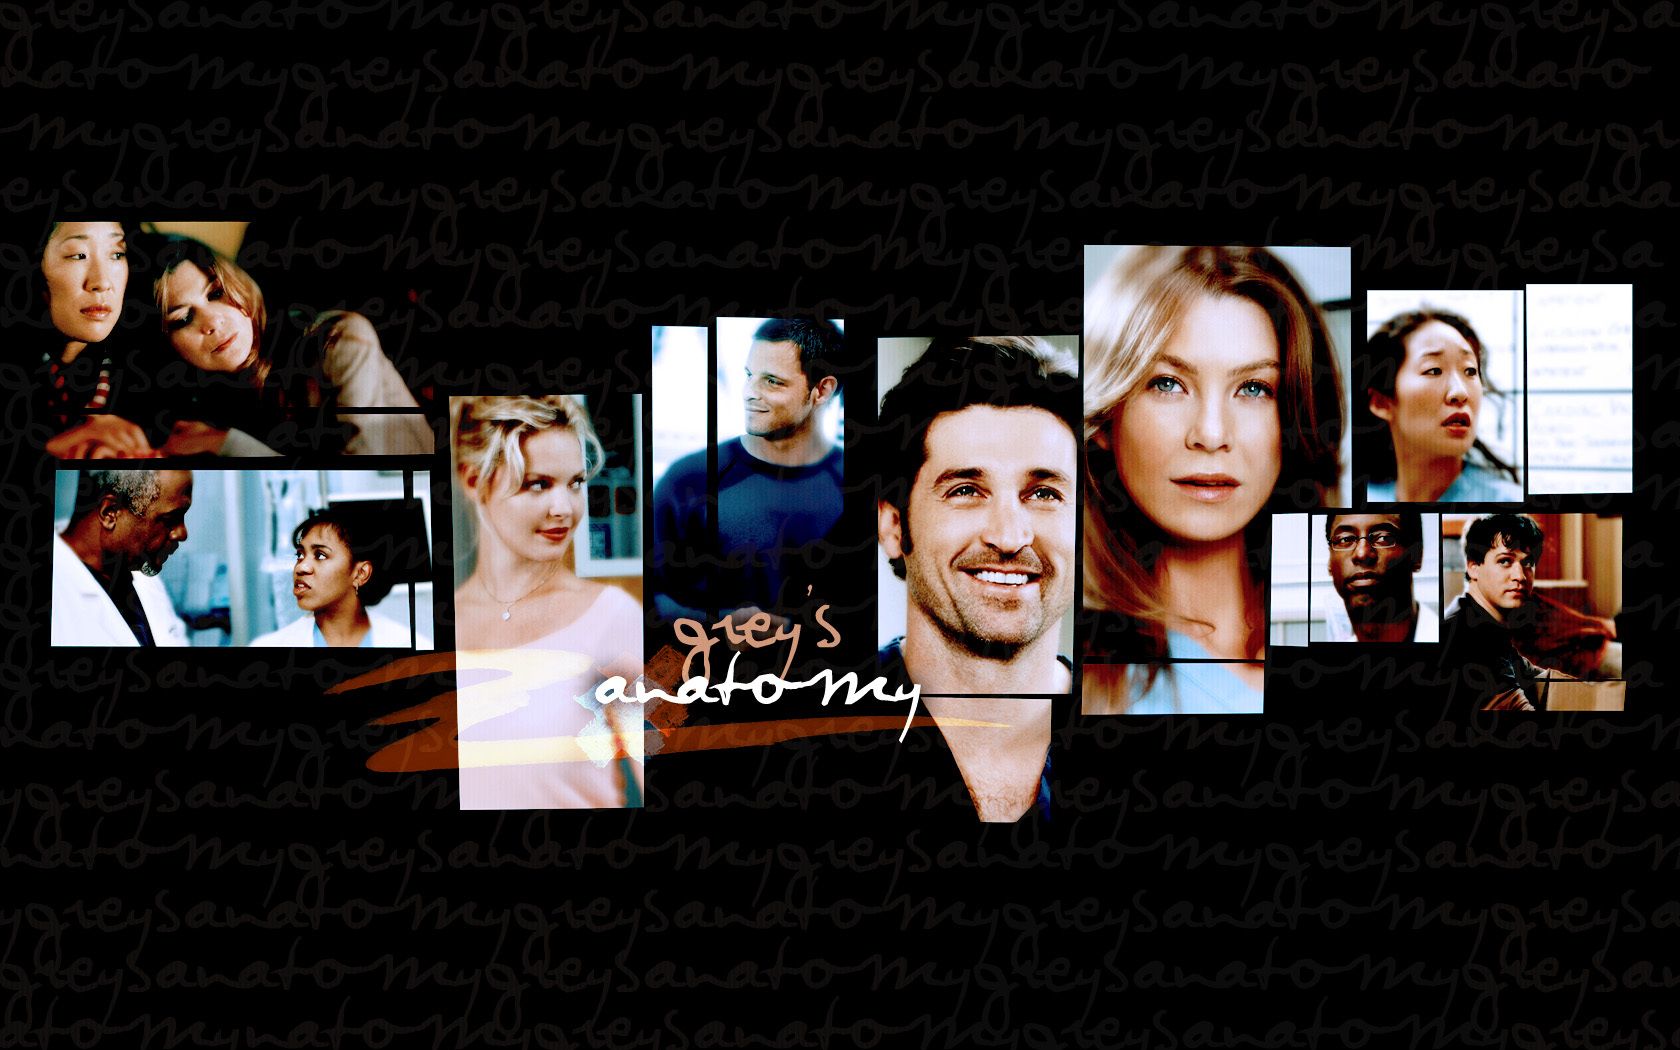 Grey's Anatomy wallpaper with the cast of the show - Grey's Anatomy